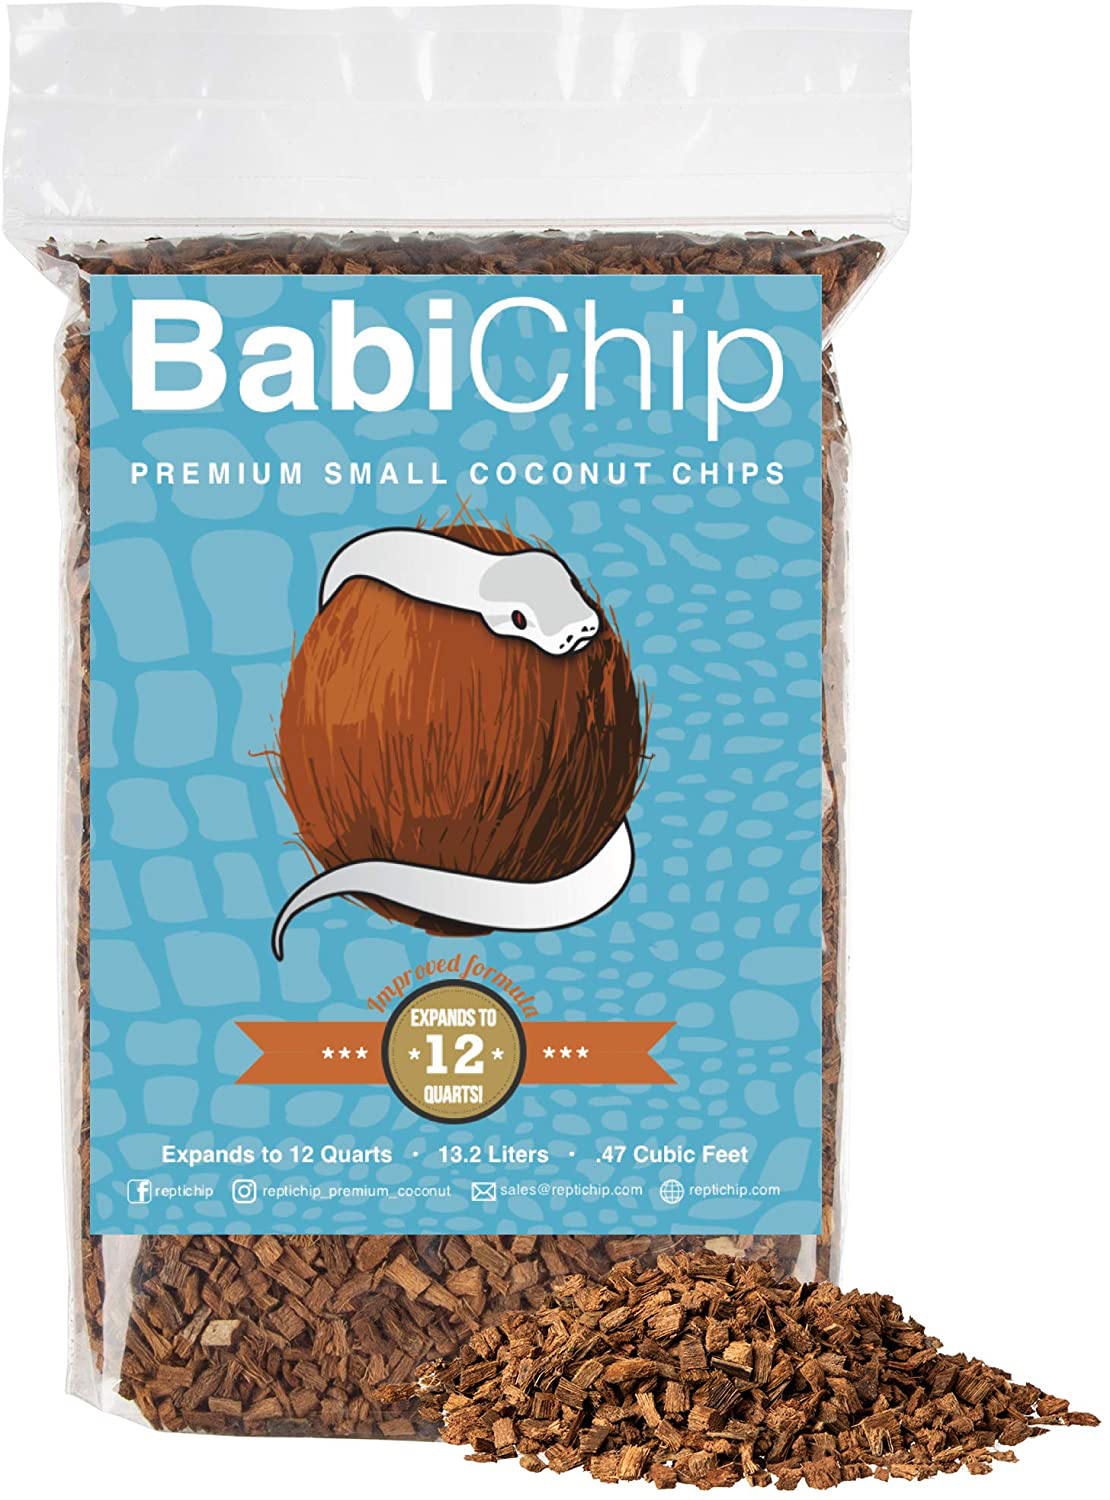 Babichip Coconut Substrate for Reptiles Loose Small Sized Coconut Husk Chip Reptile Bedding